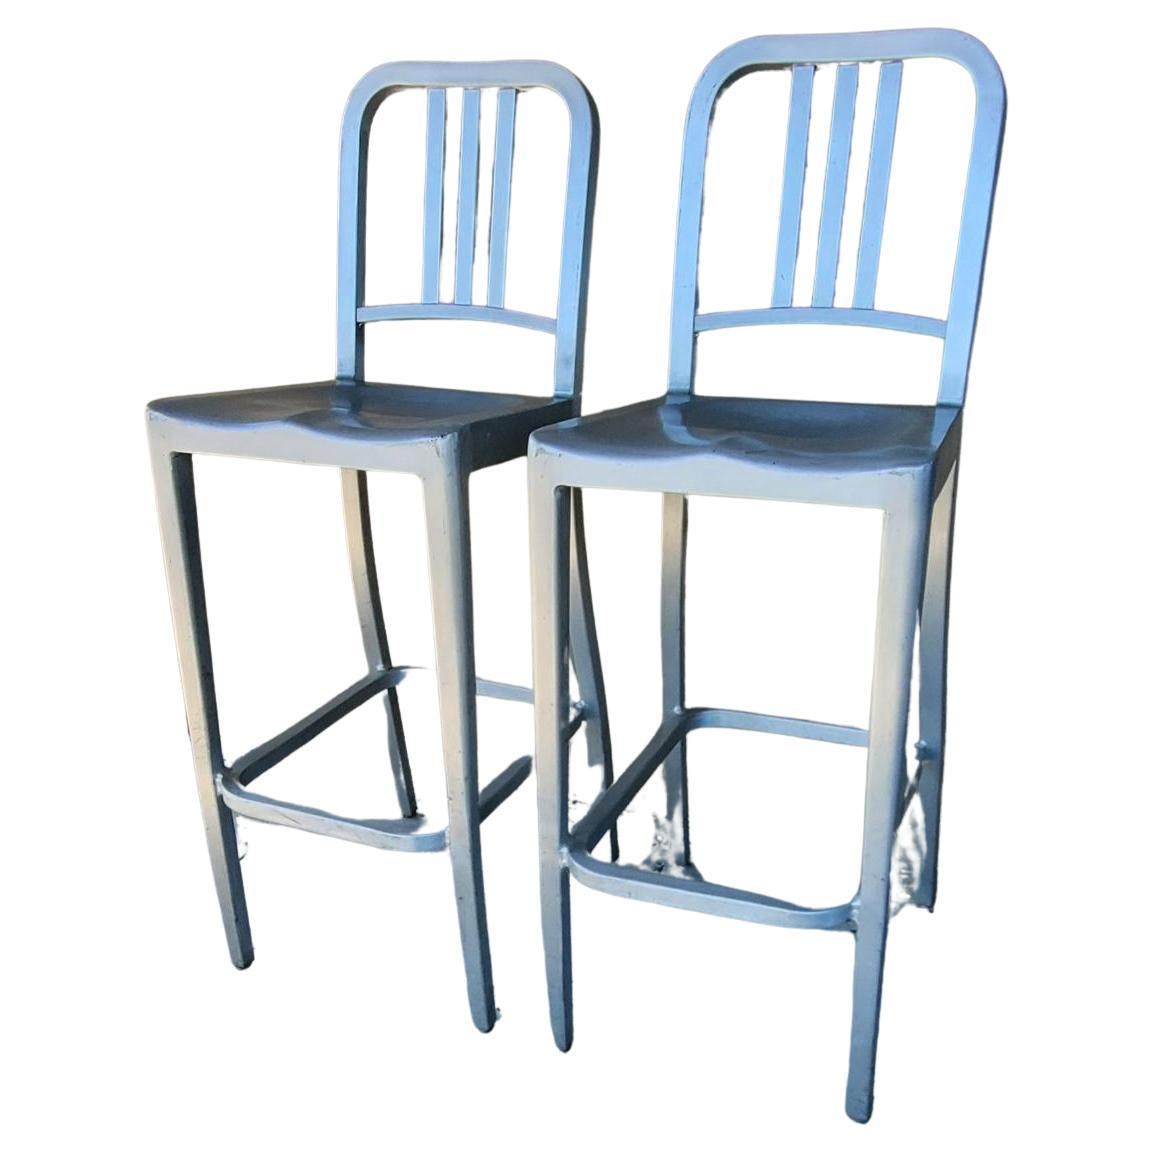 2 Bar Stools Tall Brushed Aluminum Indoor Outdoor EMECO Barstools Labeled For Sale